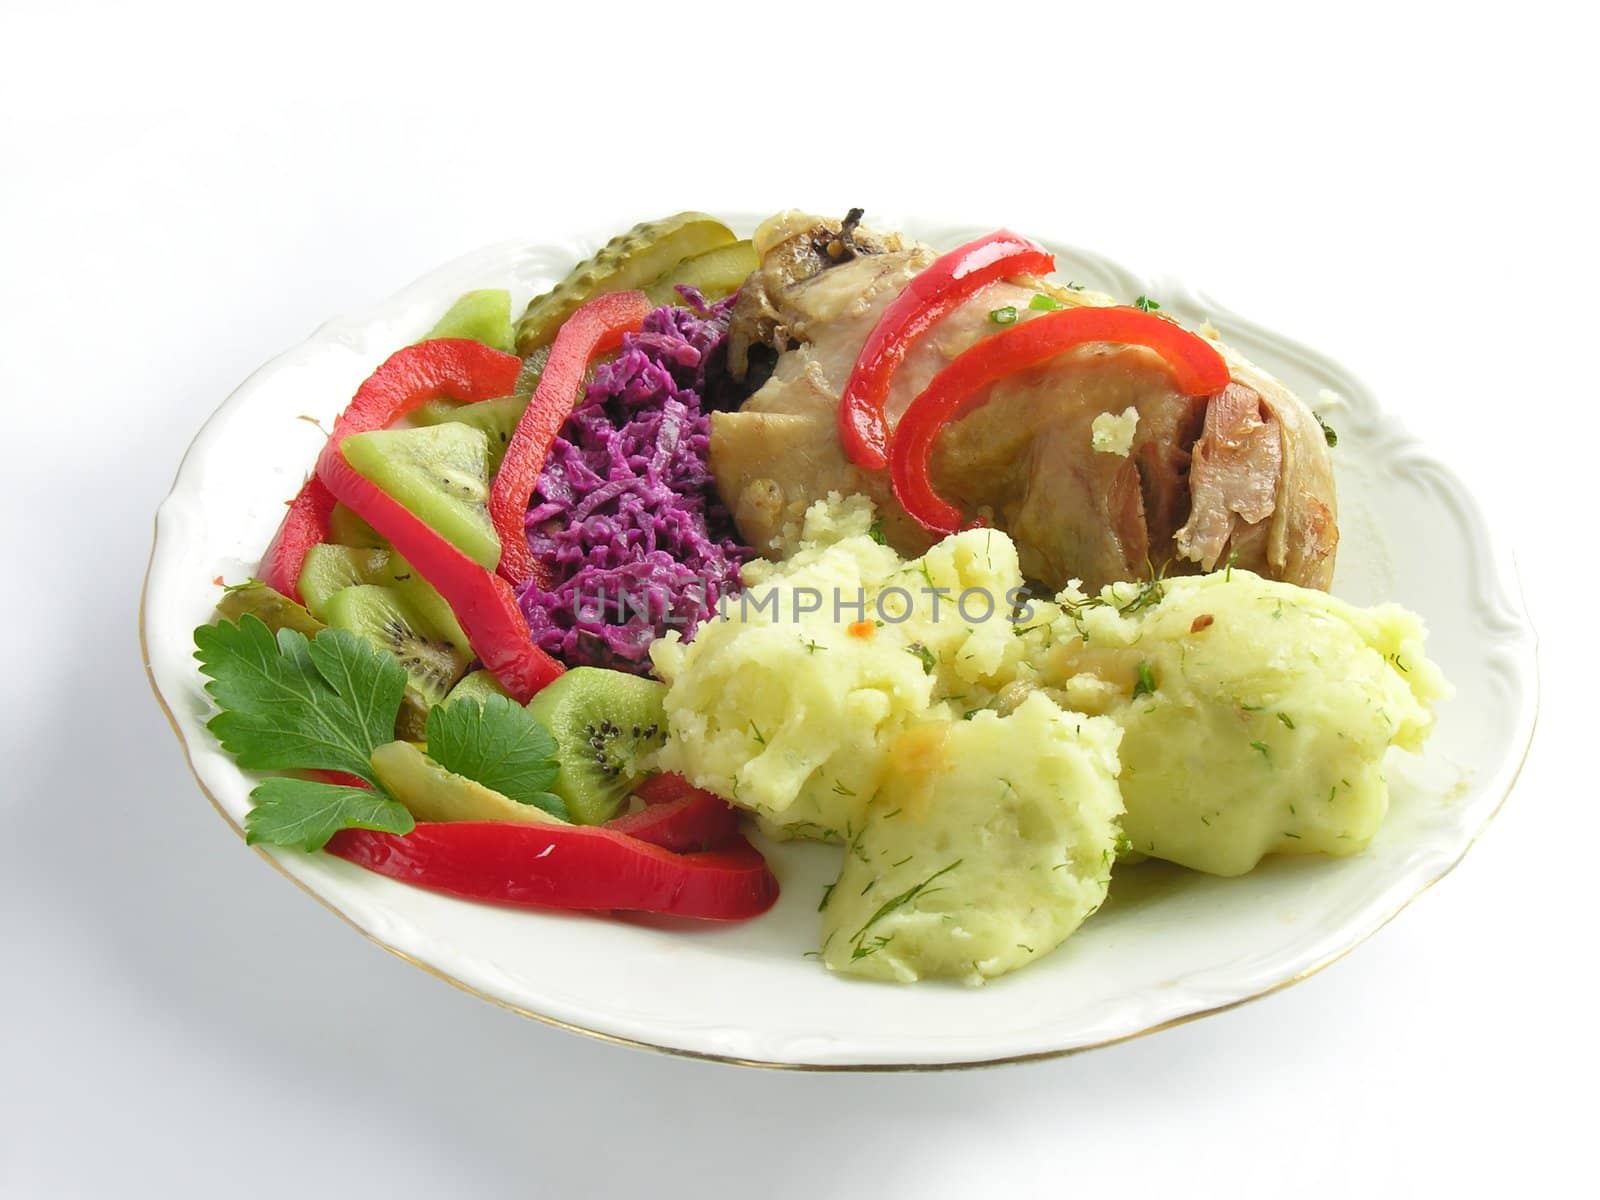 rich dinner dish with meat and vegetable by RAIMA